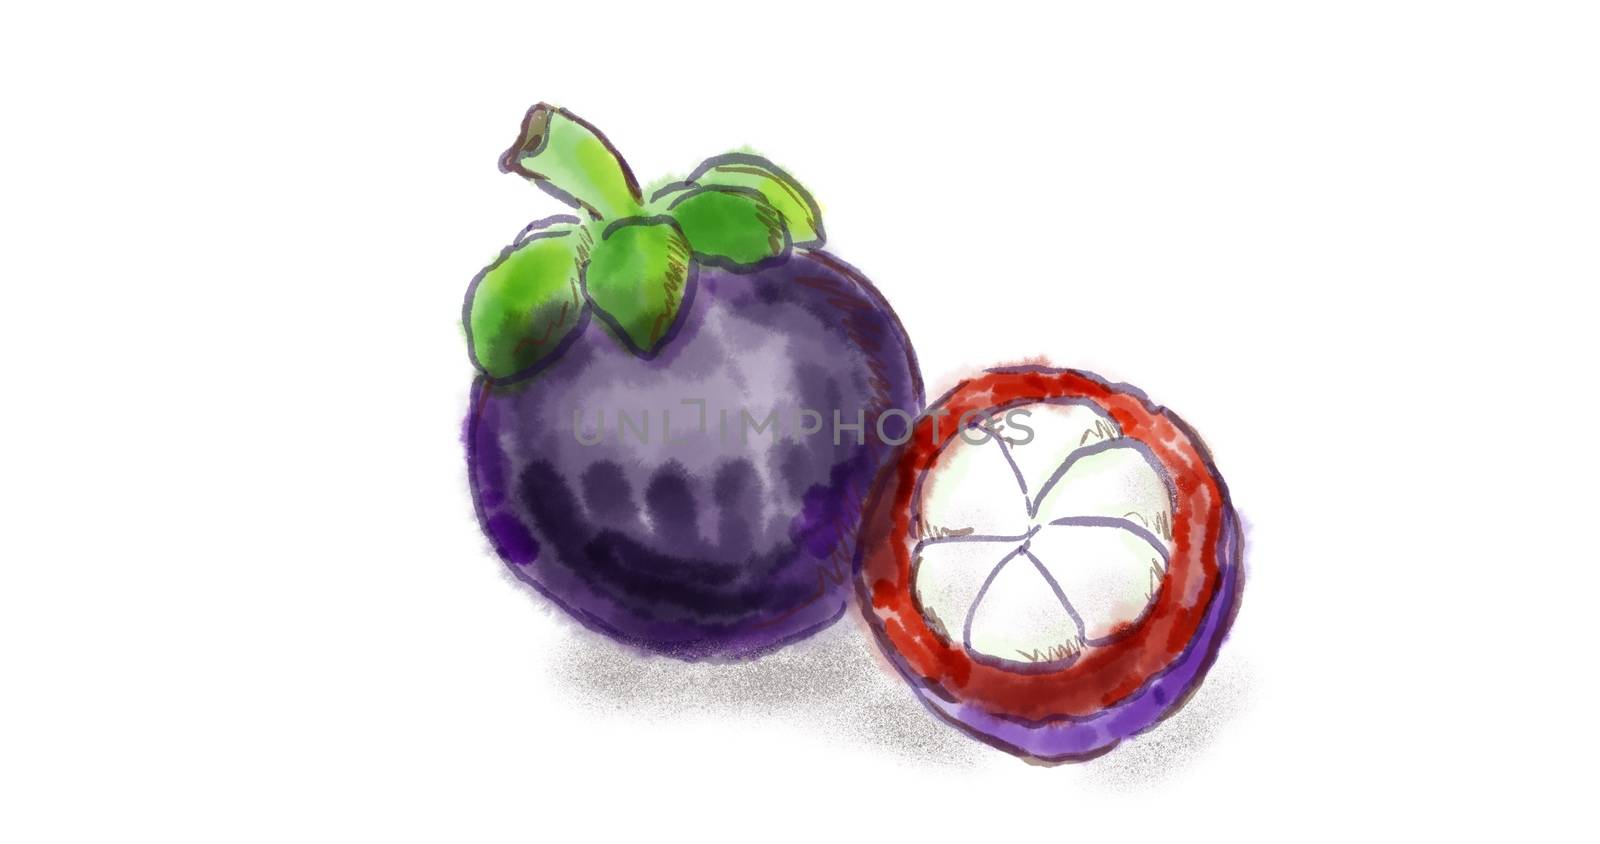 Watercolor drawing of a Mangosteen (Garcinia mangostana), also known as the purple mangosteen fruit on white.